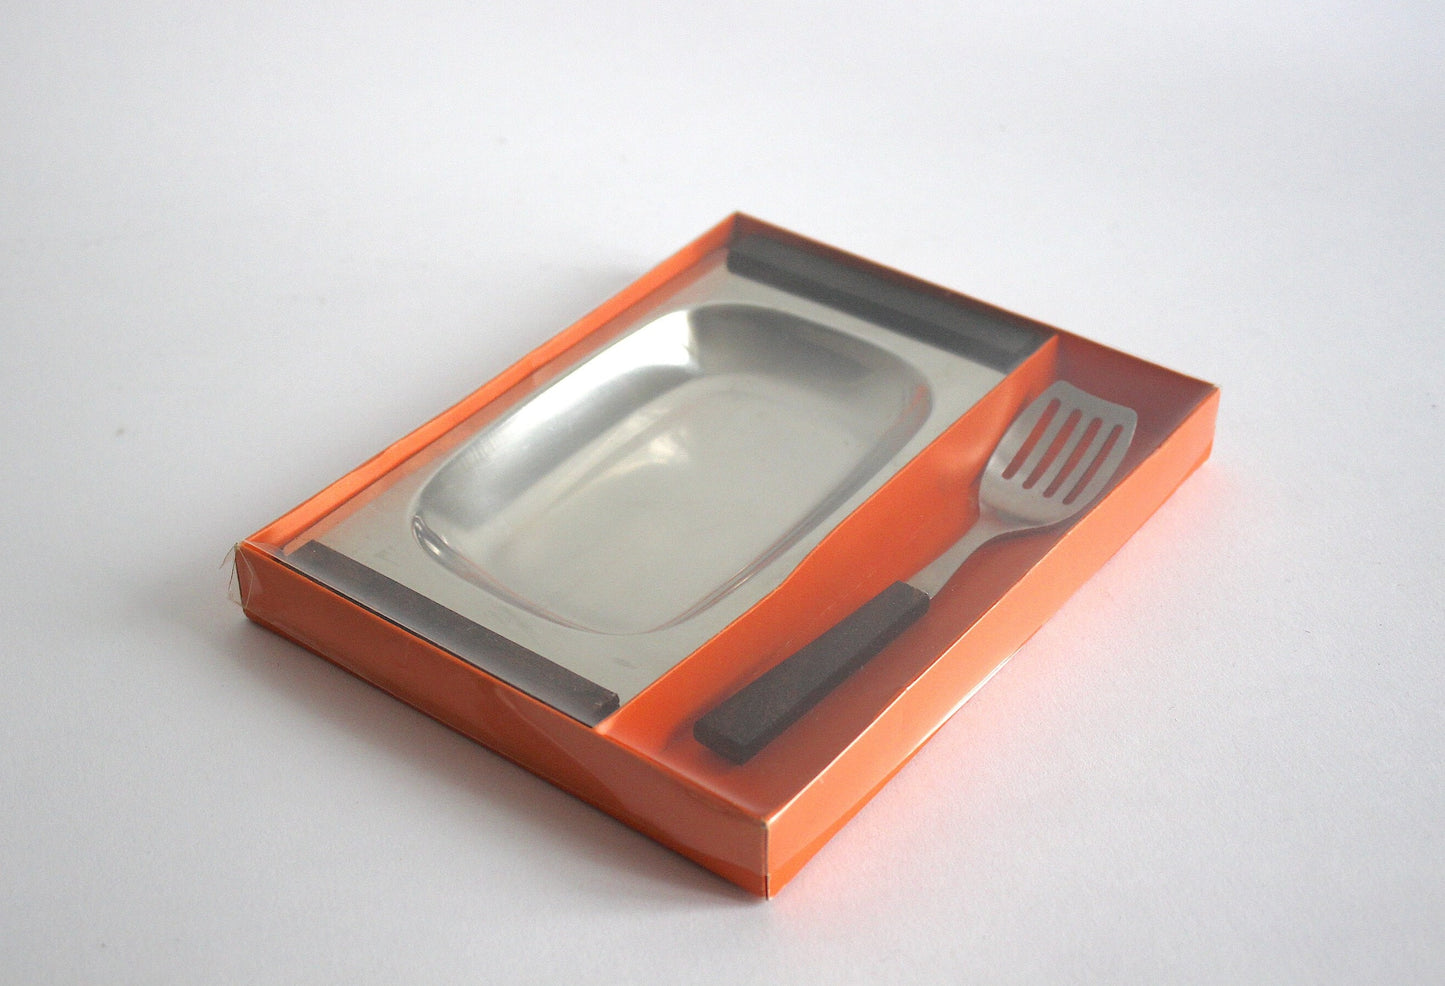 Practical 1970s Sardine Tray from Denmark - New, Unopened, and Stylish